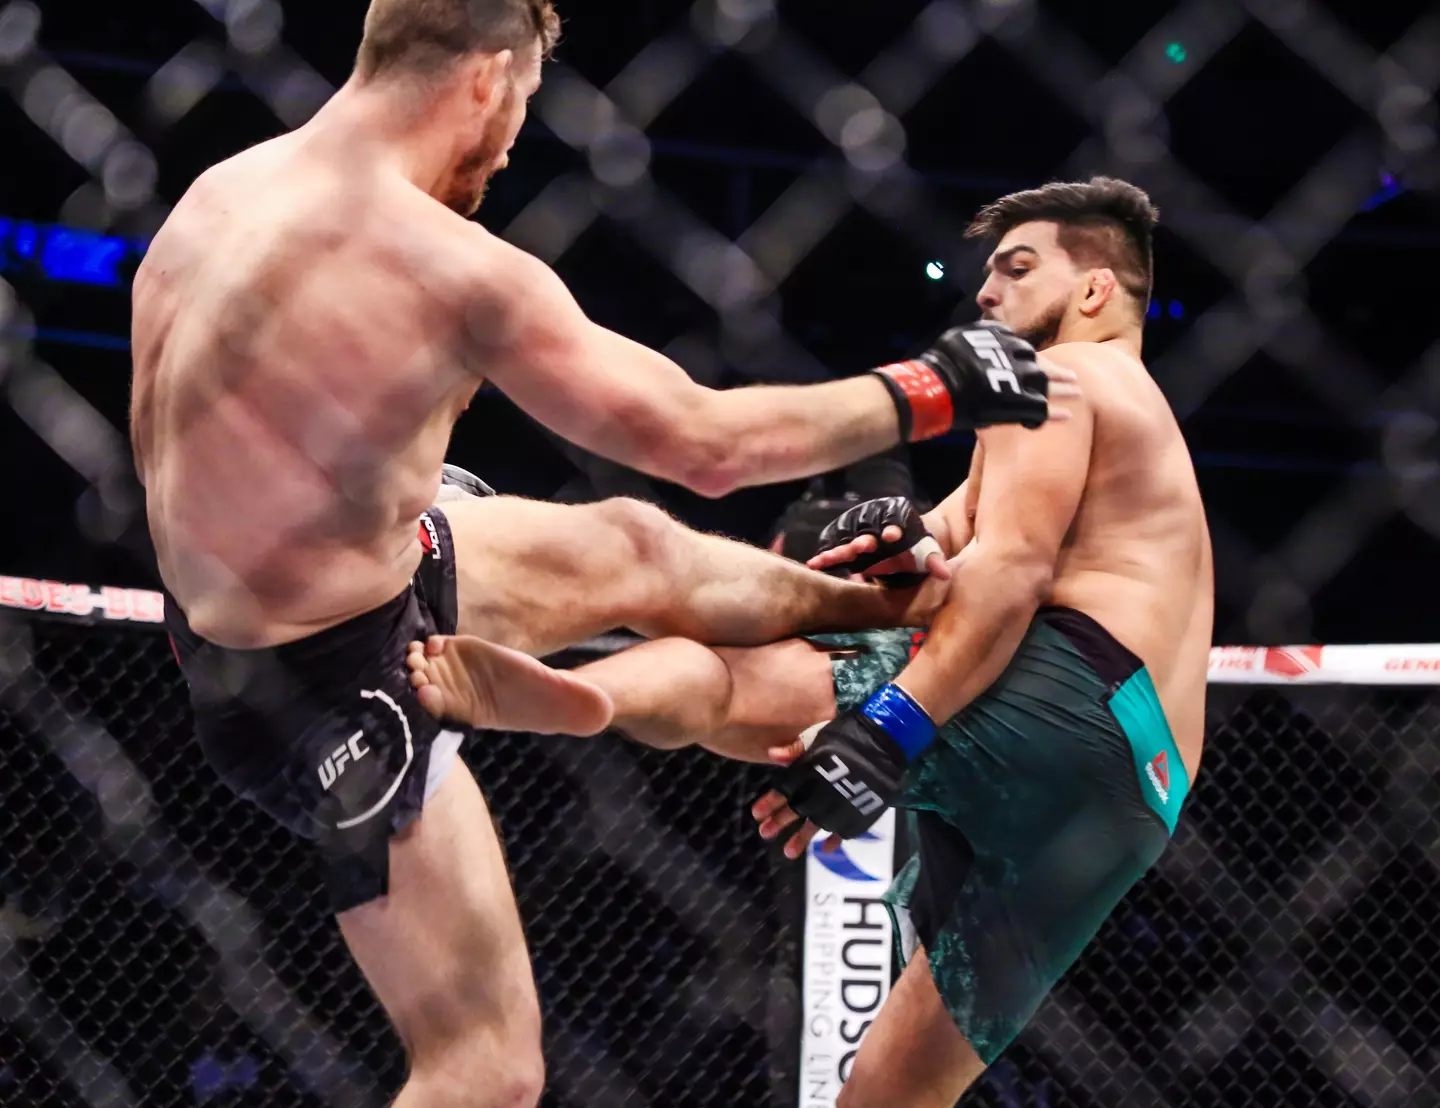 Bisping knows his way around a decent kick, too.